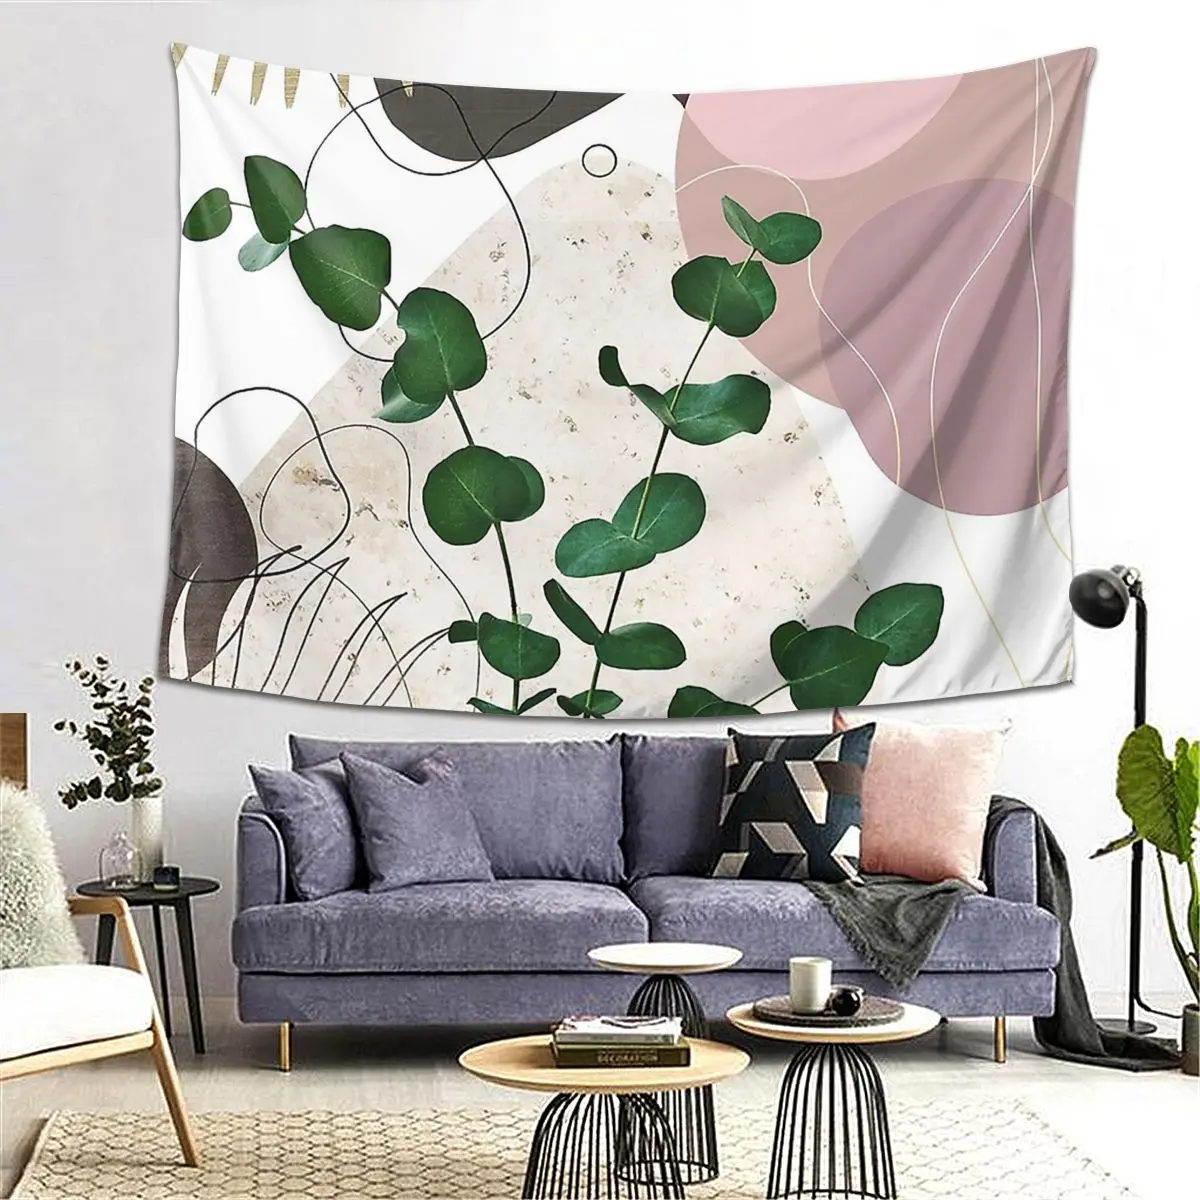 

Eucalyptus Fan Palm Finesse Tapestry Decoration Art Aesthetic Tapestries for Living Room Bedroom Decor Home Hippie Wall Hanging